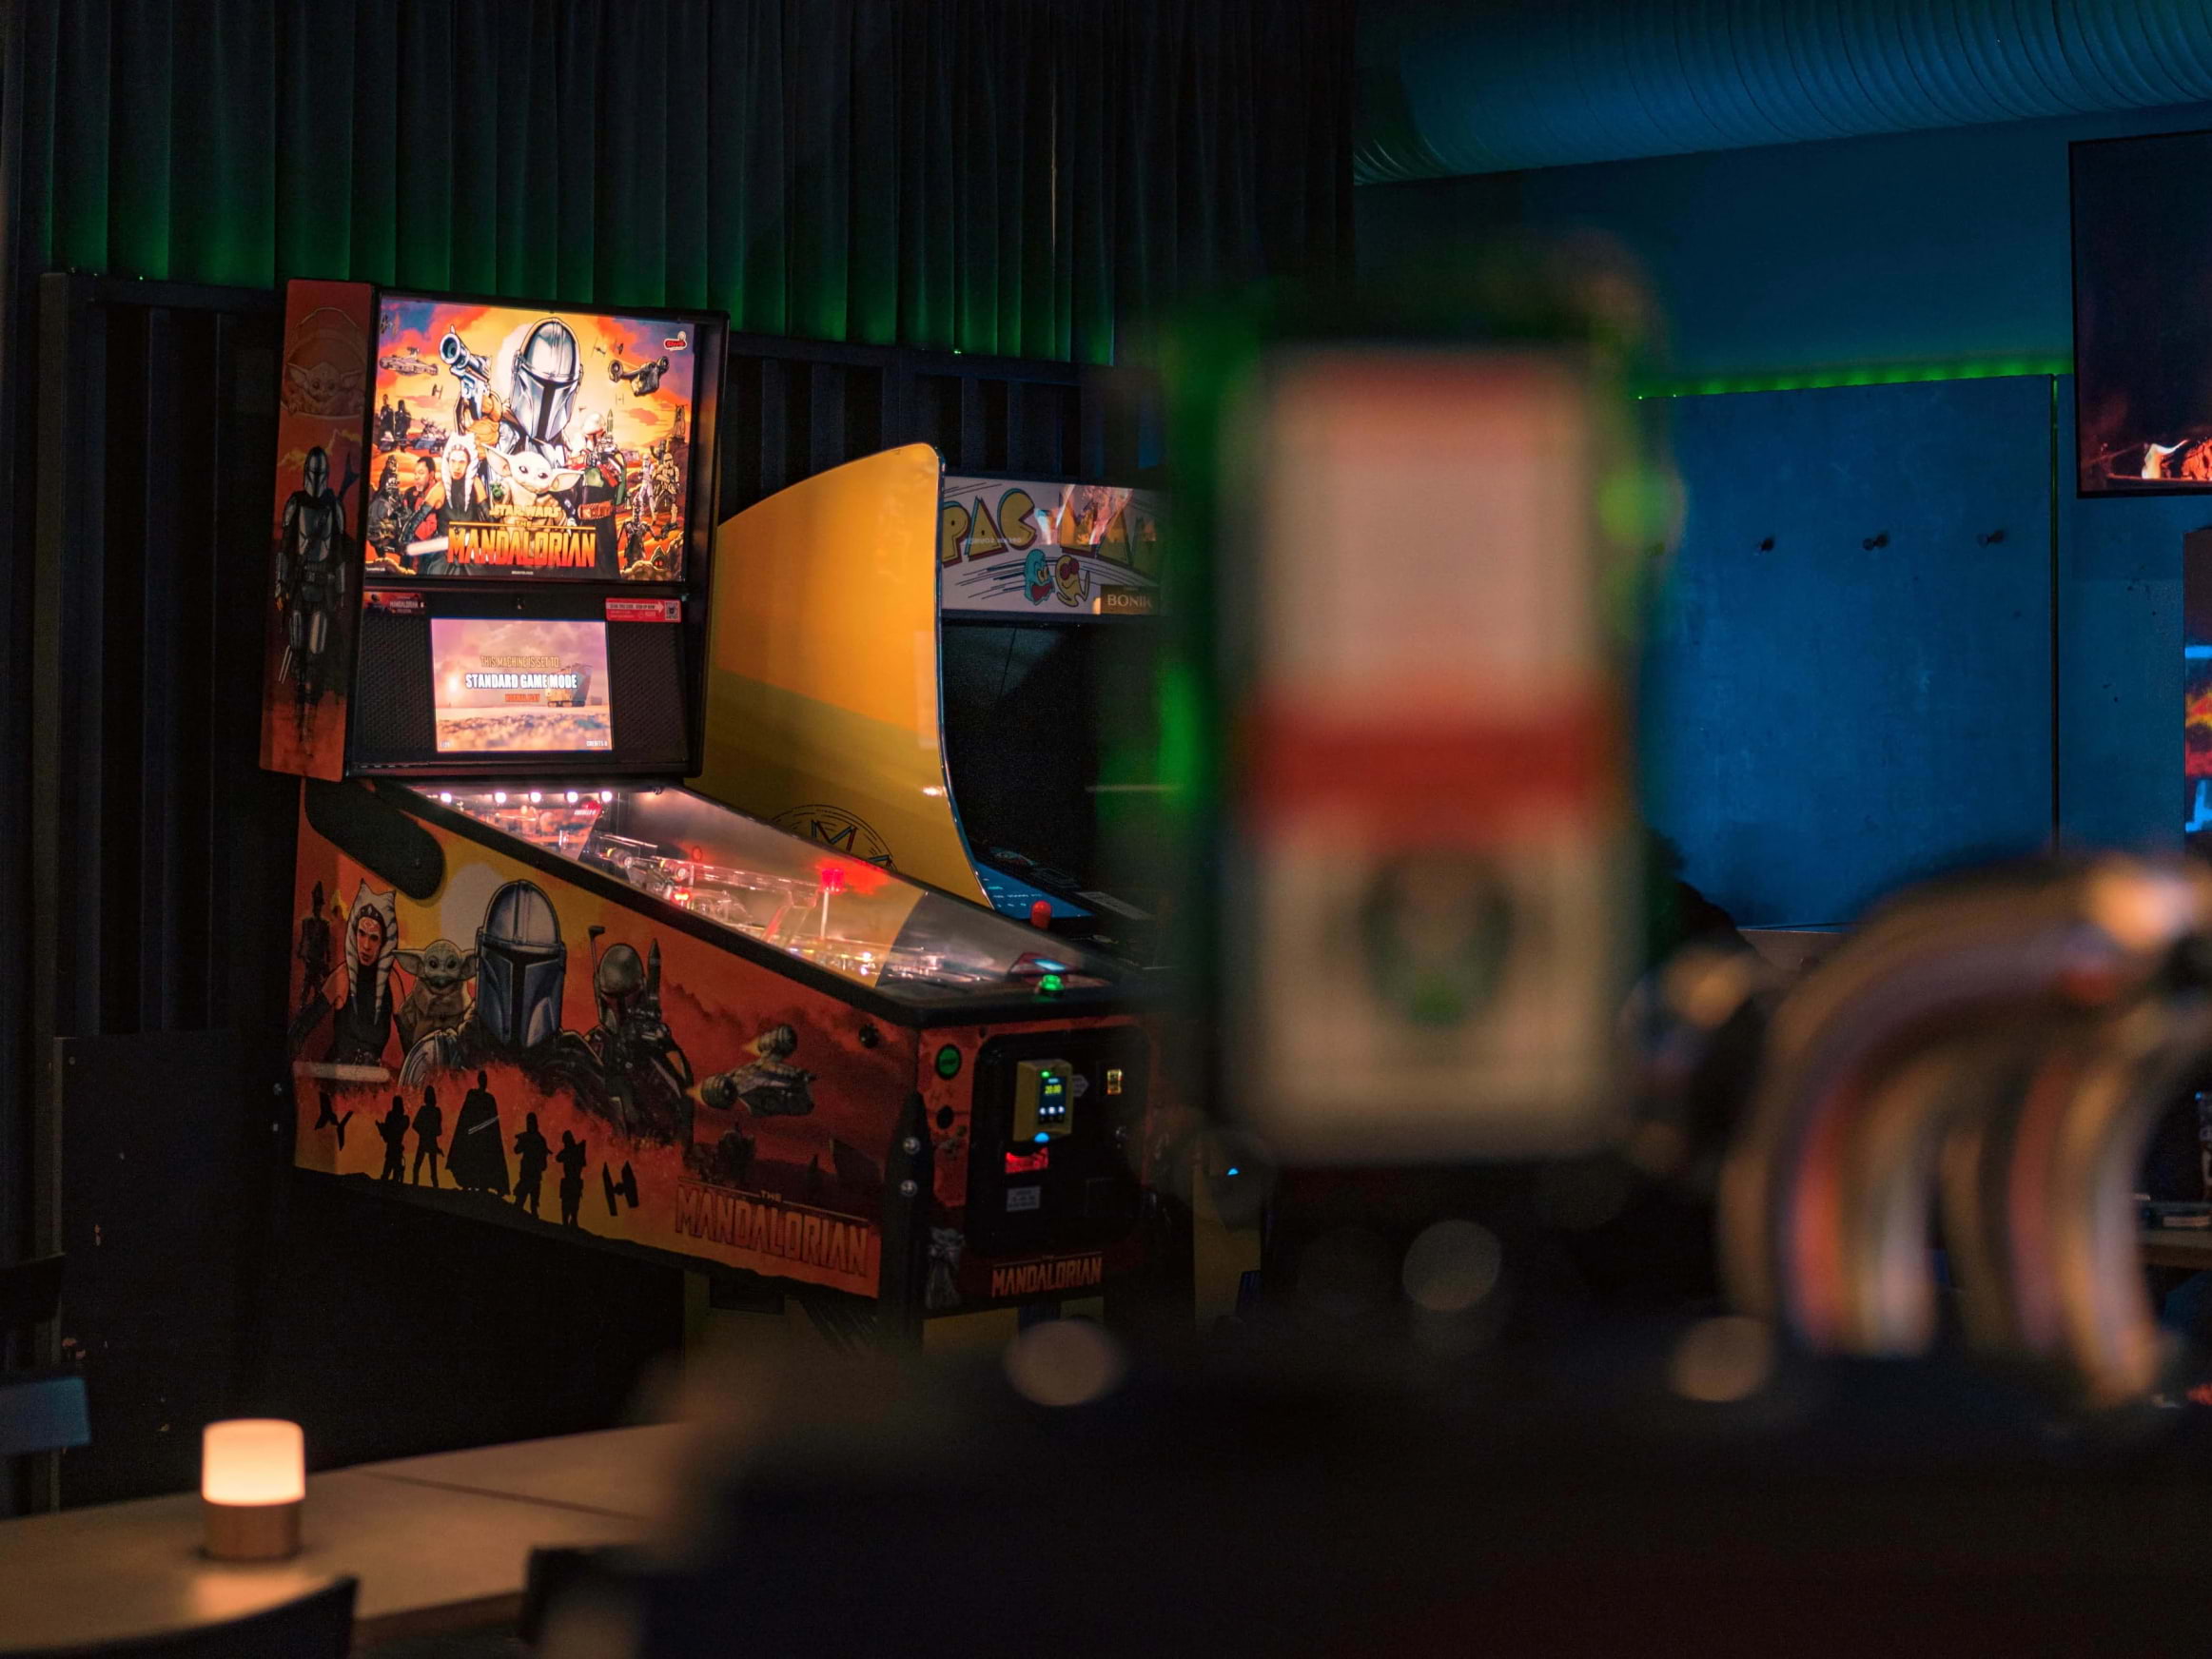 A pair of arcade machines lit up behind an out-of-focus bar